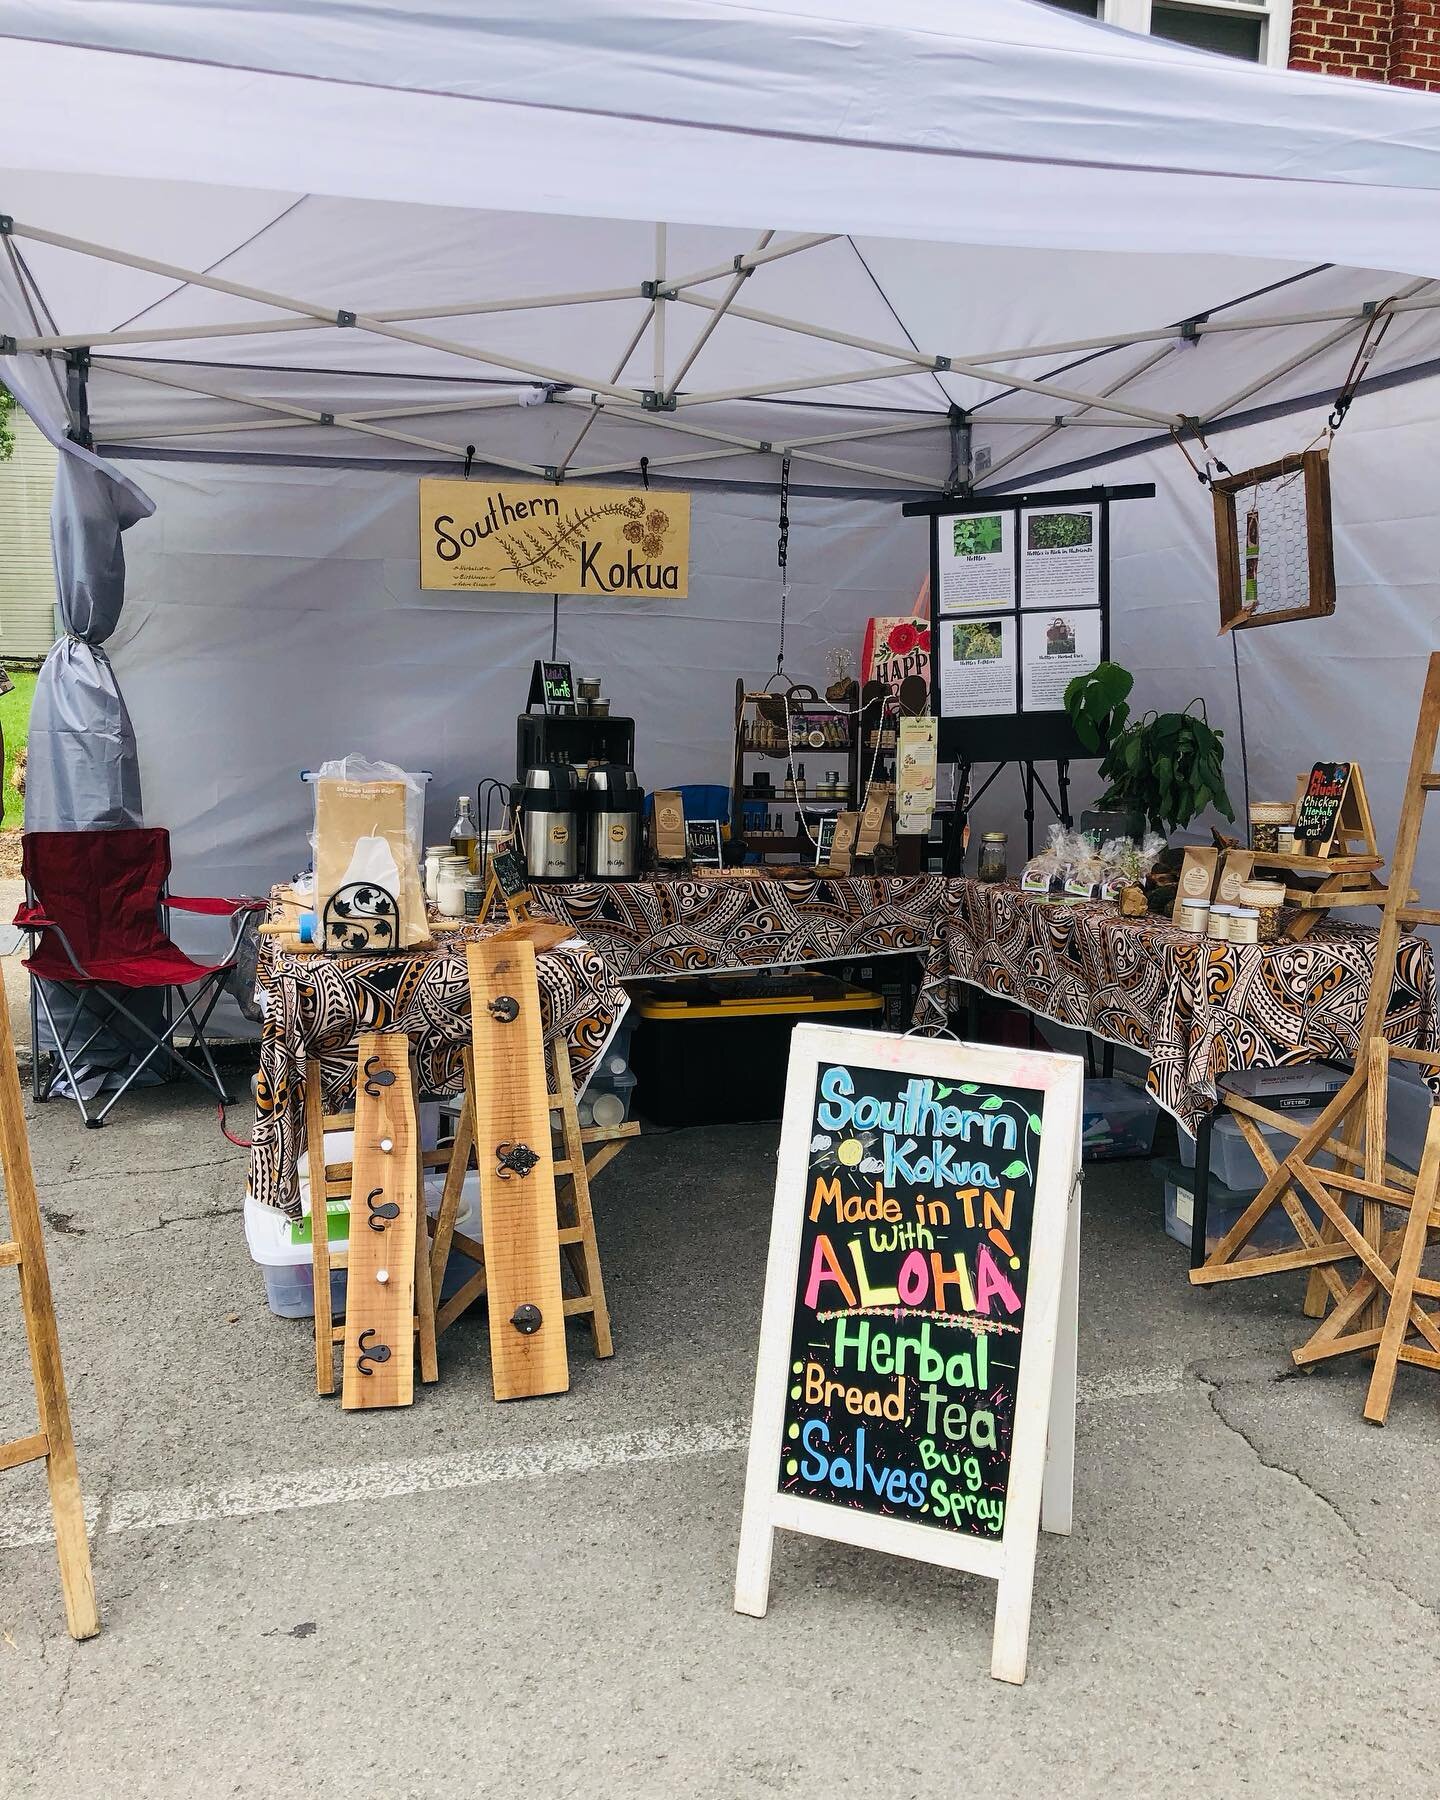 🌿Pictures from the Cumberland Gap Festival last weekend. We met lots of good people &amp; can&rsquo;t wait to go back again!💫

🌿Our beautiful new Southern Kokua wood sign was made by my friend &amp; neighbor, Deborah. She is a talented wood carver